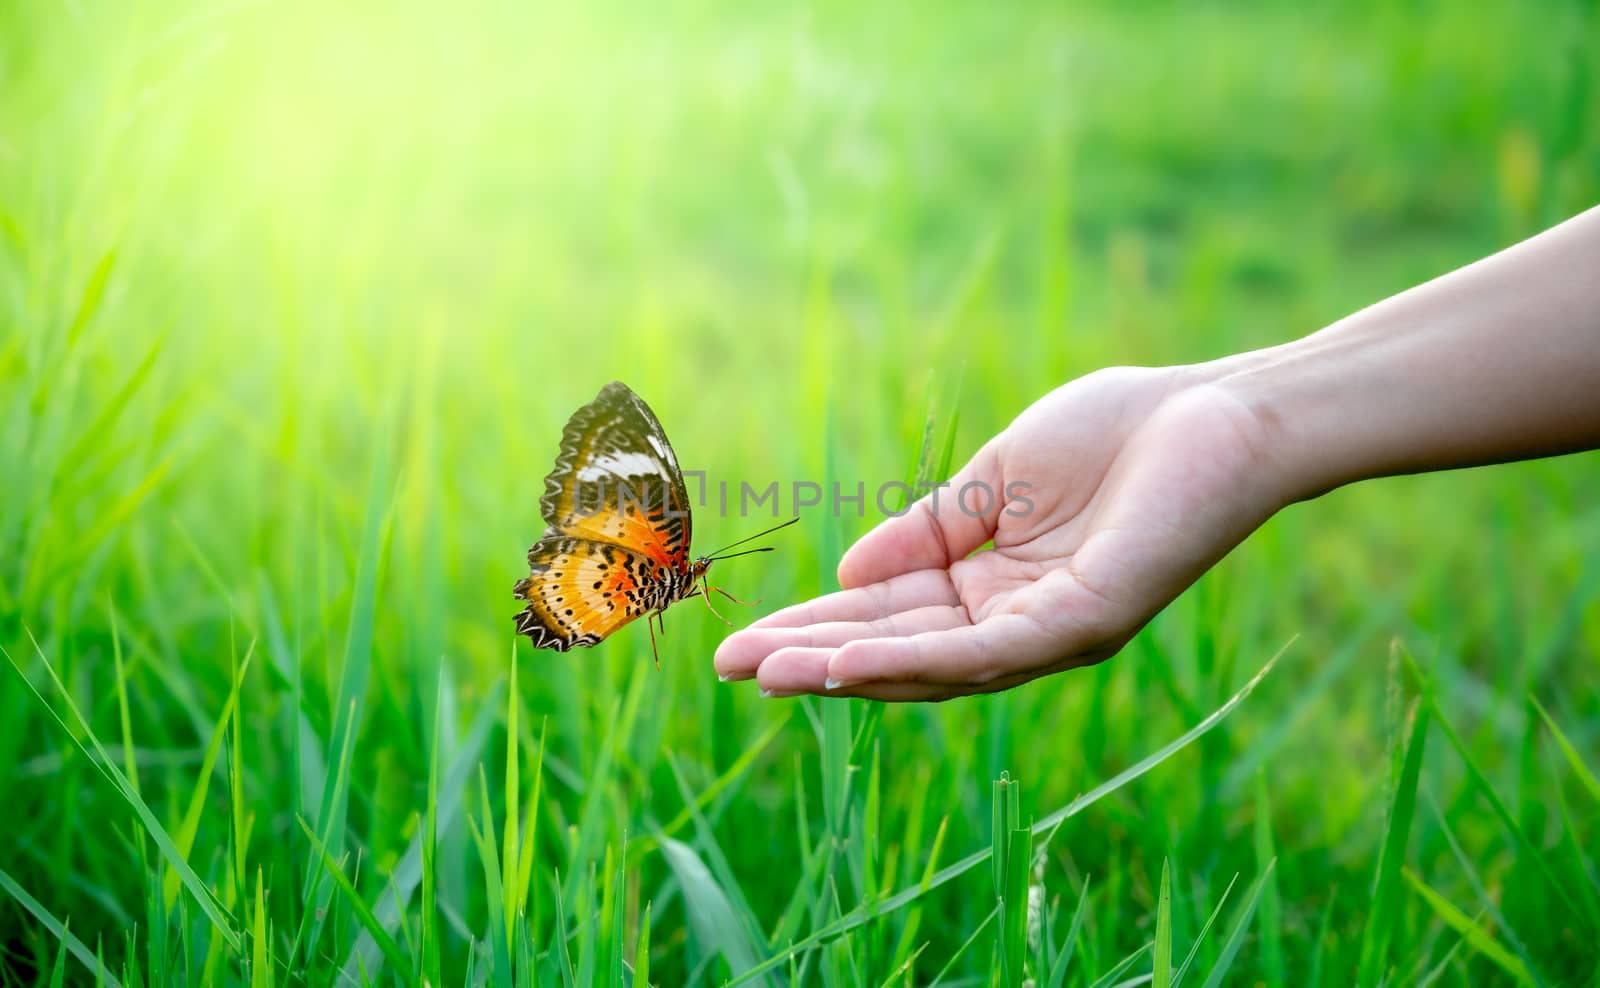 A butterfly is flying on the hand of a woman in a lush meadow.